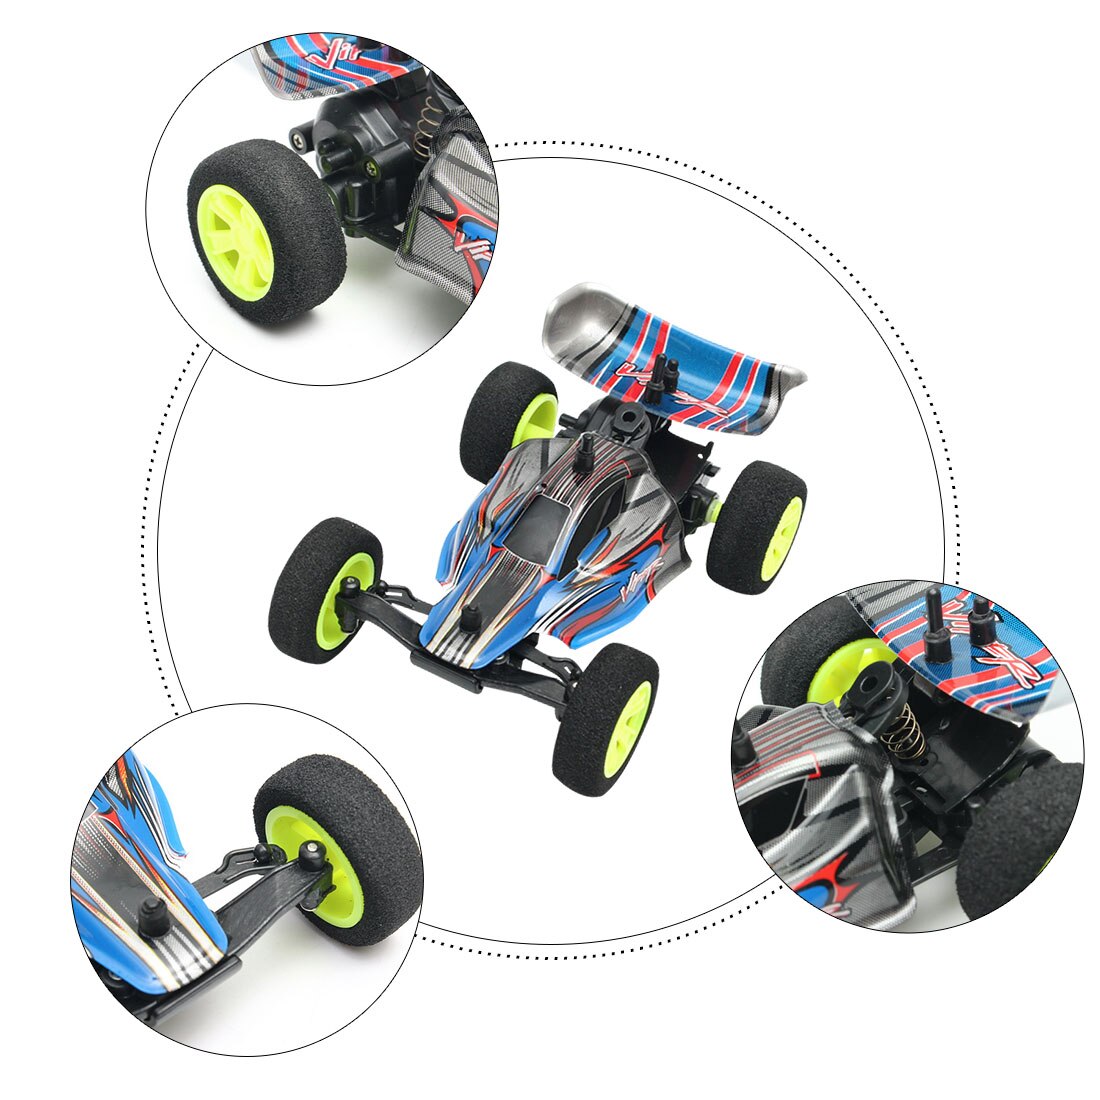 Velocis RC Car 1:32 2.4Ghz 4CH Mutiplayer in Parallel Operate Radio Control Car Mini Crawler RC Vehicles Toys for Kids